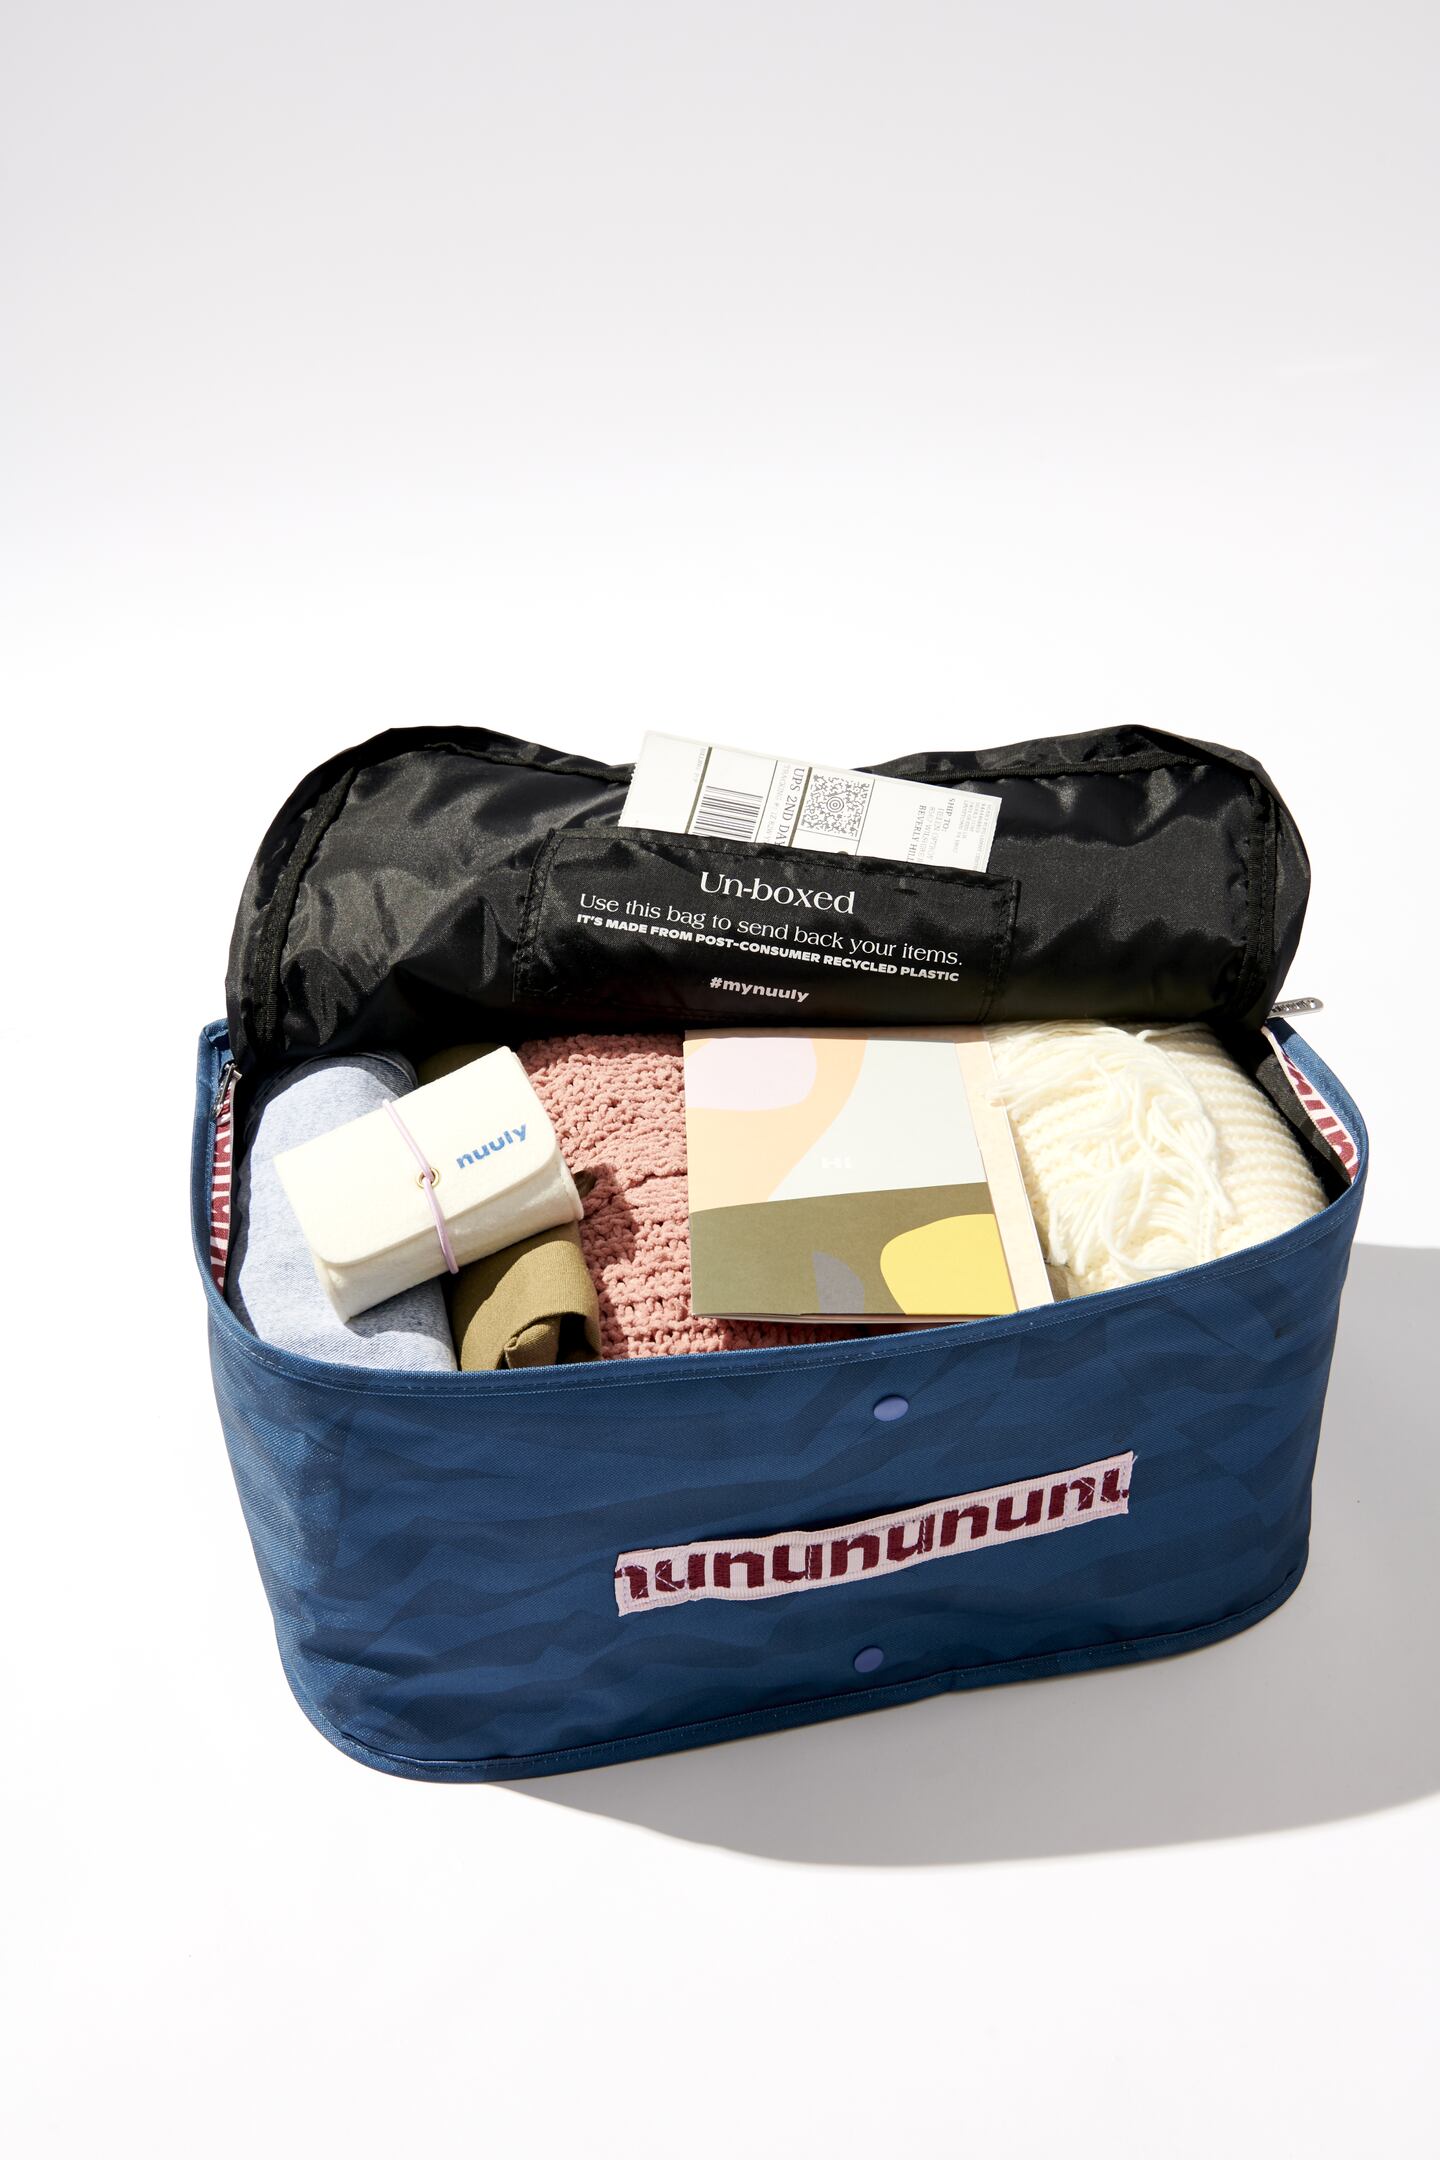 Urban Outfitters' rental company Nuuly's reusable fashion rental bag.